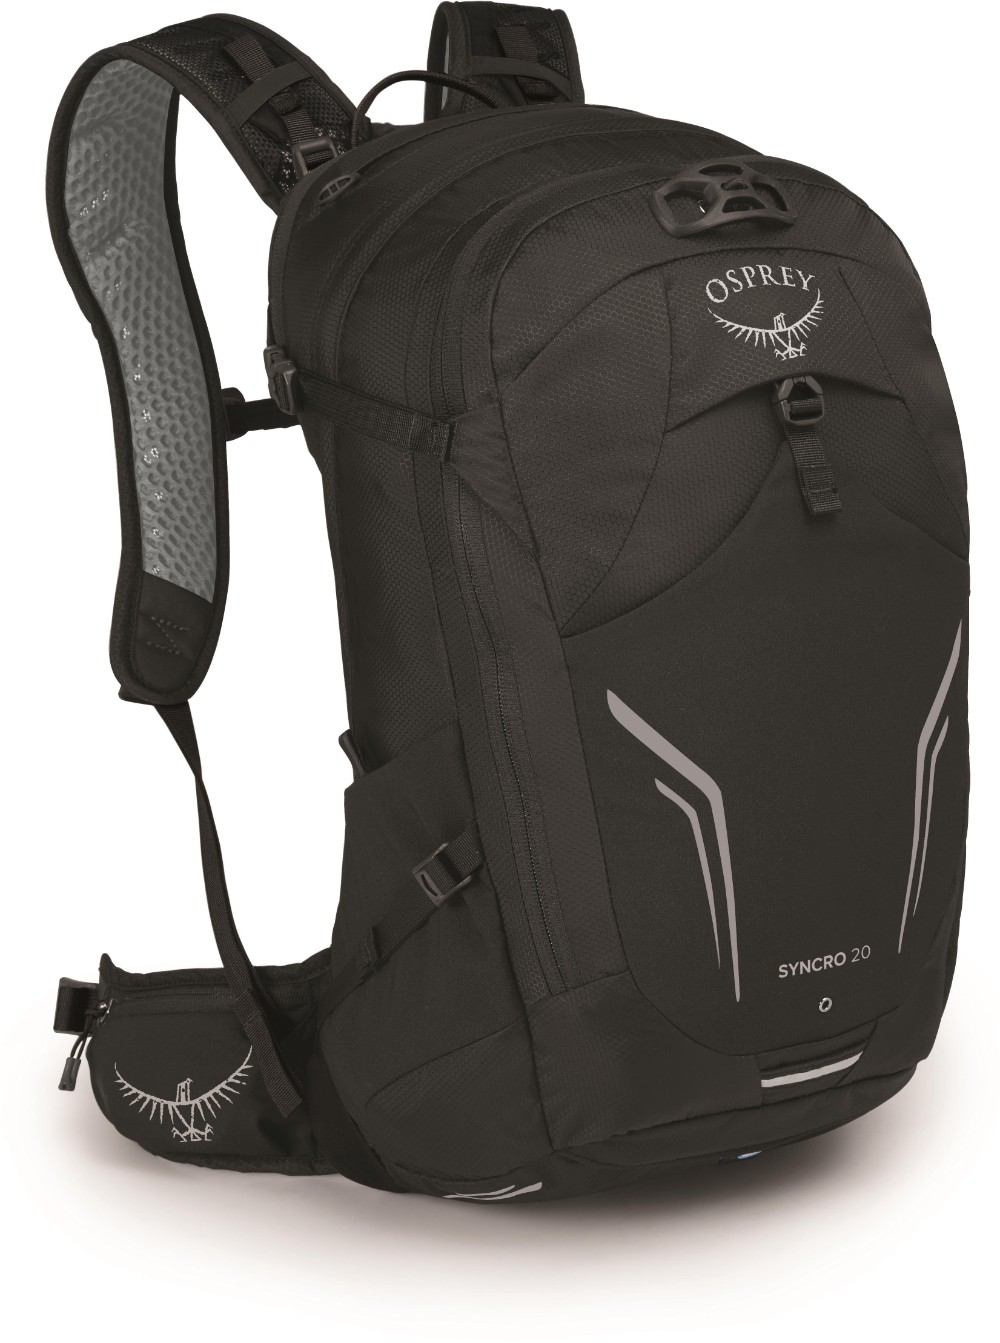 Syncro 20 Backpack image 0